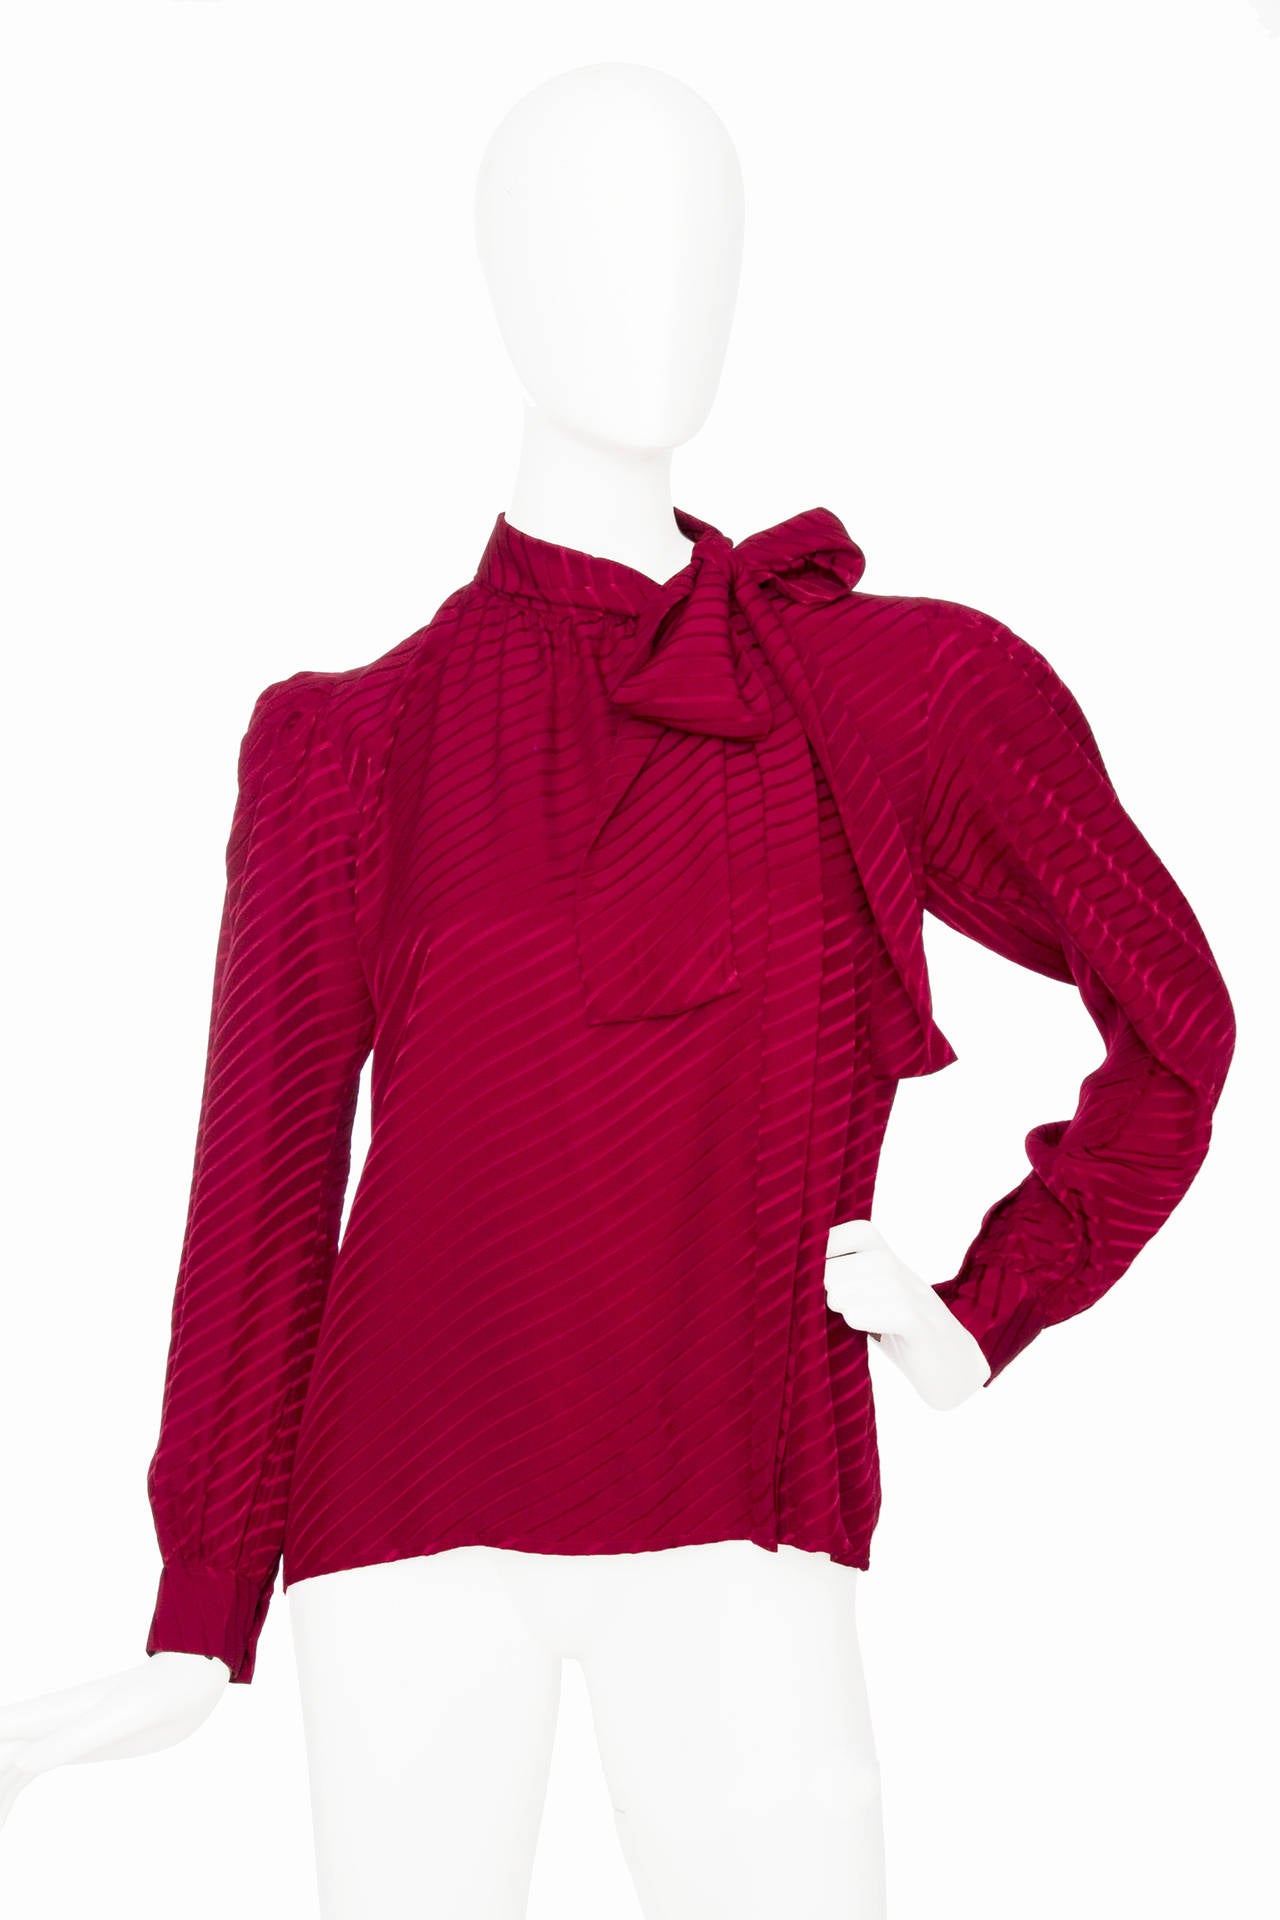 A 1980s Yves Saint Laurent jacquard silk blouse with an asymmetrical and invisible front button closure. The shirt has one buttoned cuffs and and attached  bow to tie around the neck. The shoulders are slightly puffed and tulle shoulder pads.